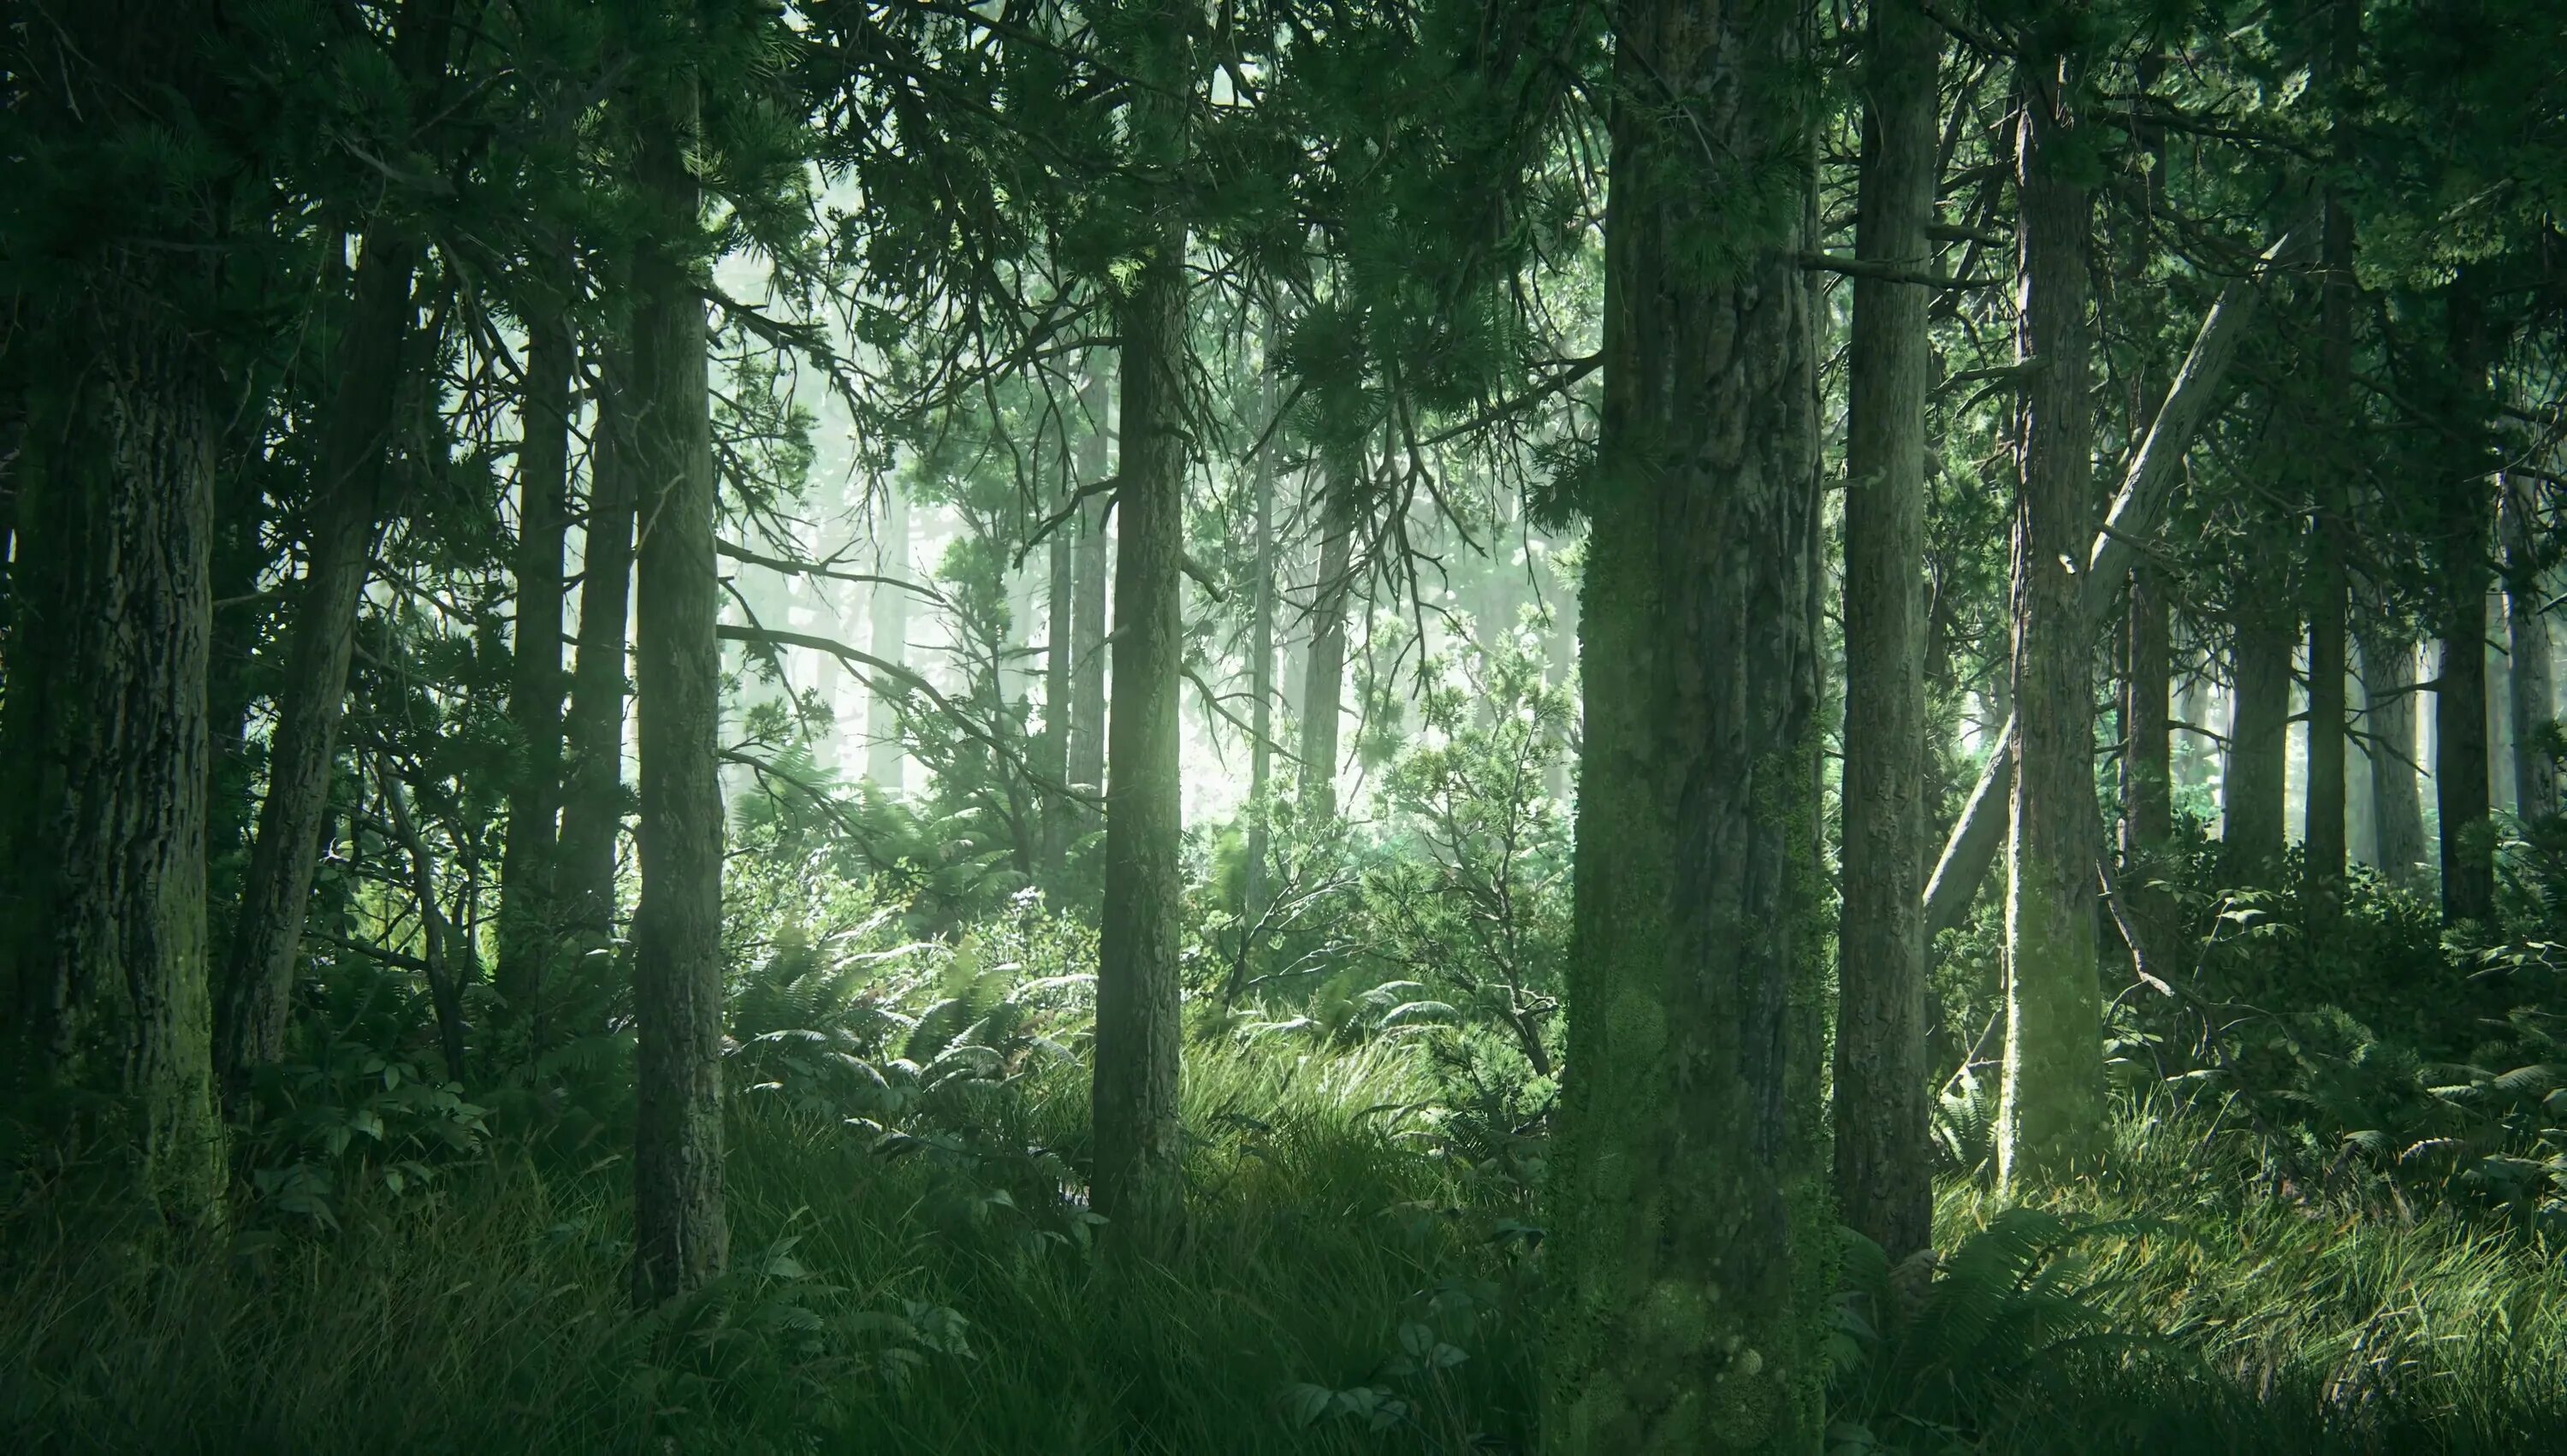 The last of us 2 лес. The last of us 2 screenshots лес. The last of us 2 лес на рабочий стол. Фон леса. Forest 2 c